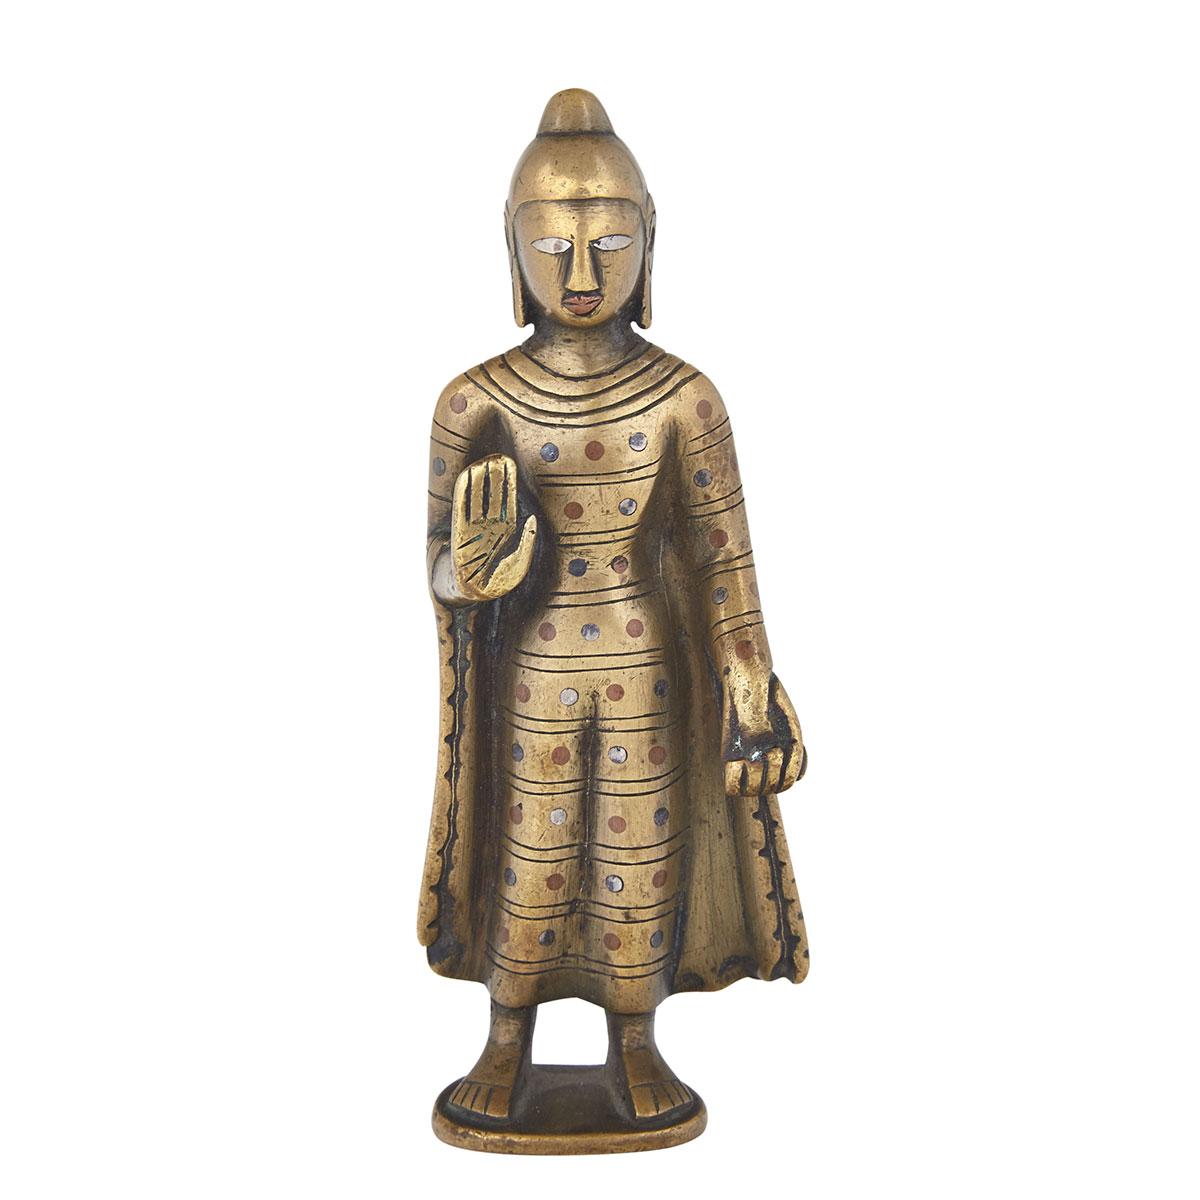 Small Standing Bronze and Silver Inlay Figure of Buddha, North India, 15th/16th Century